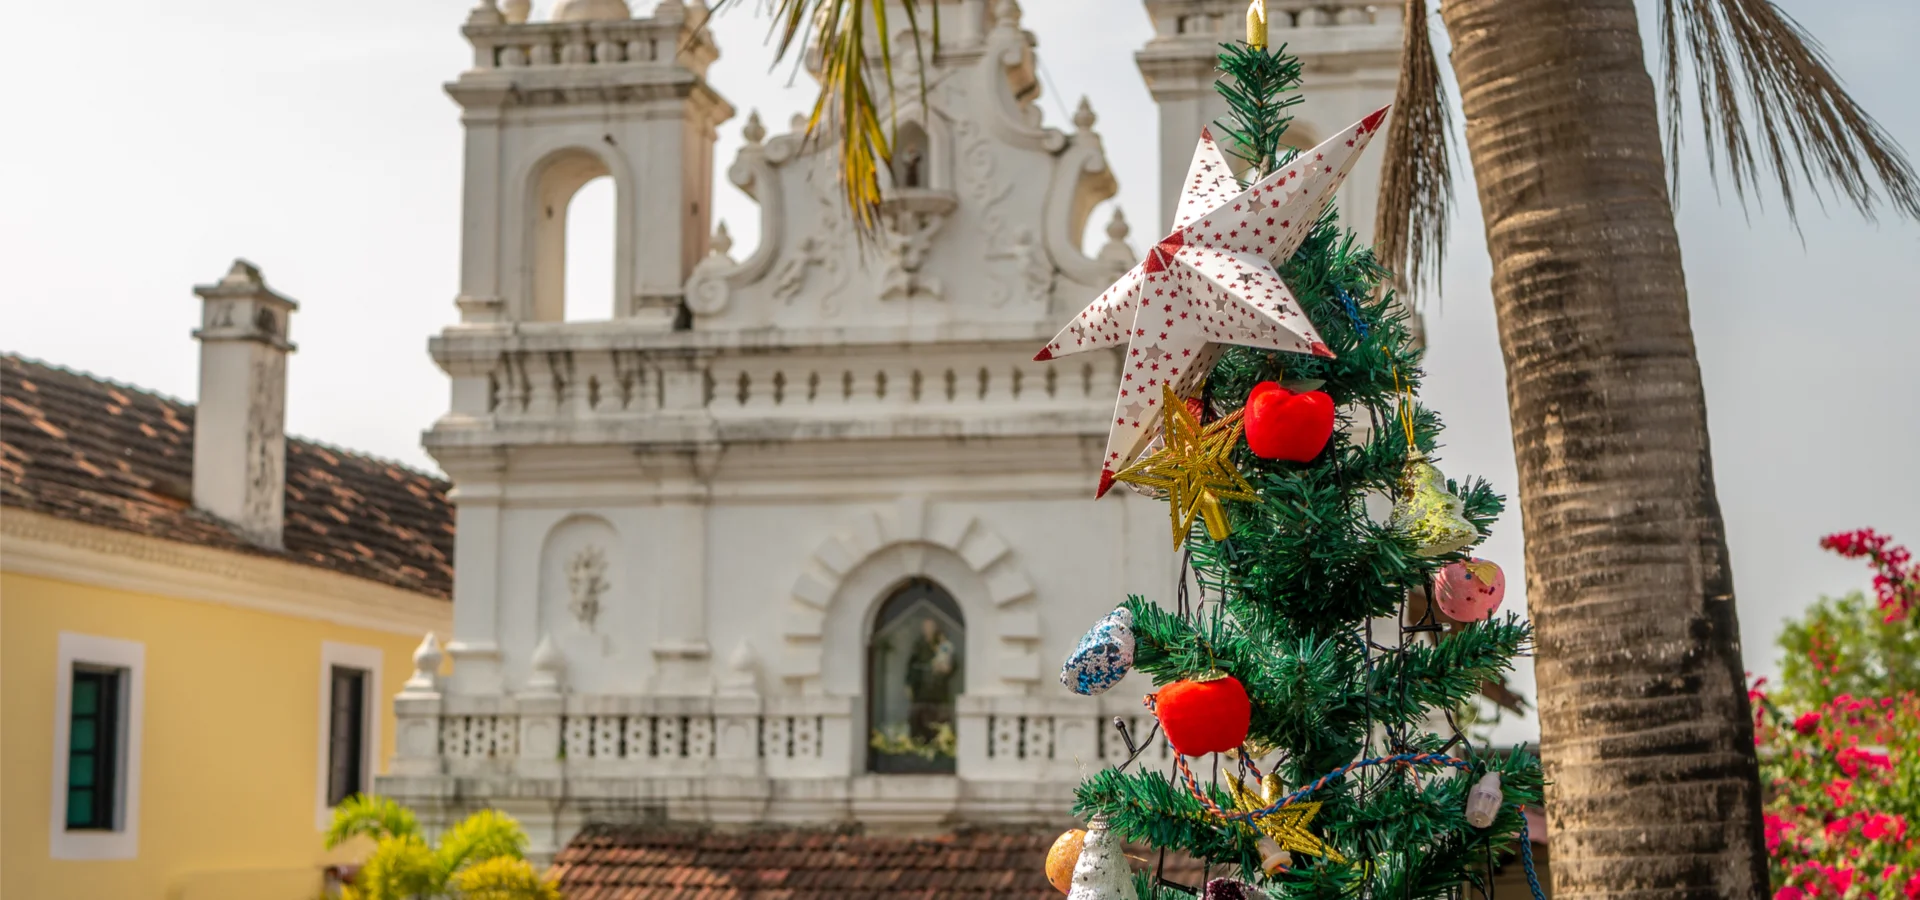 Places in India to Experience Christmas